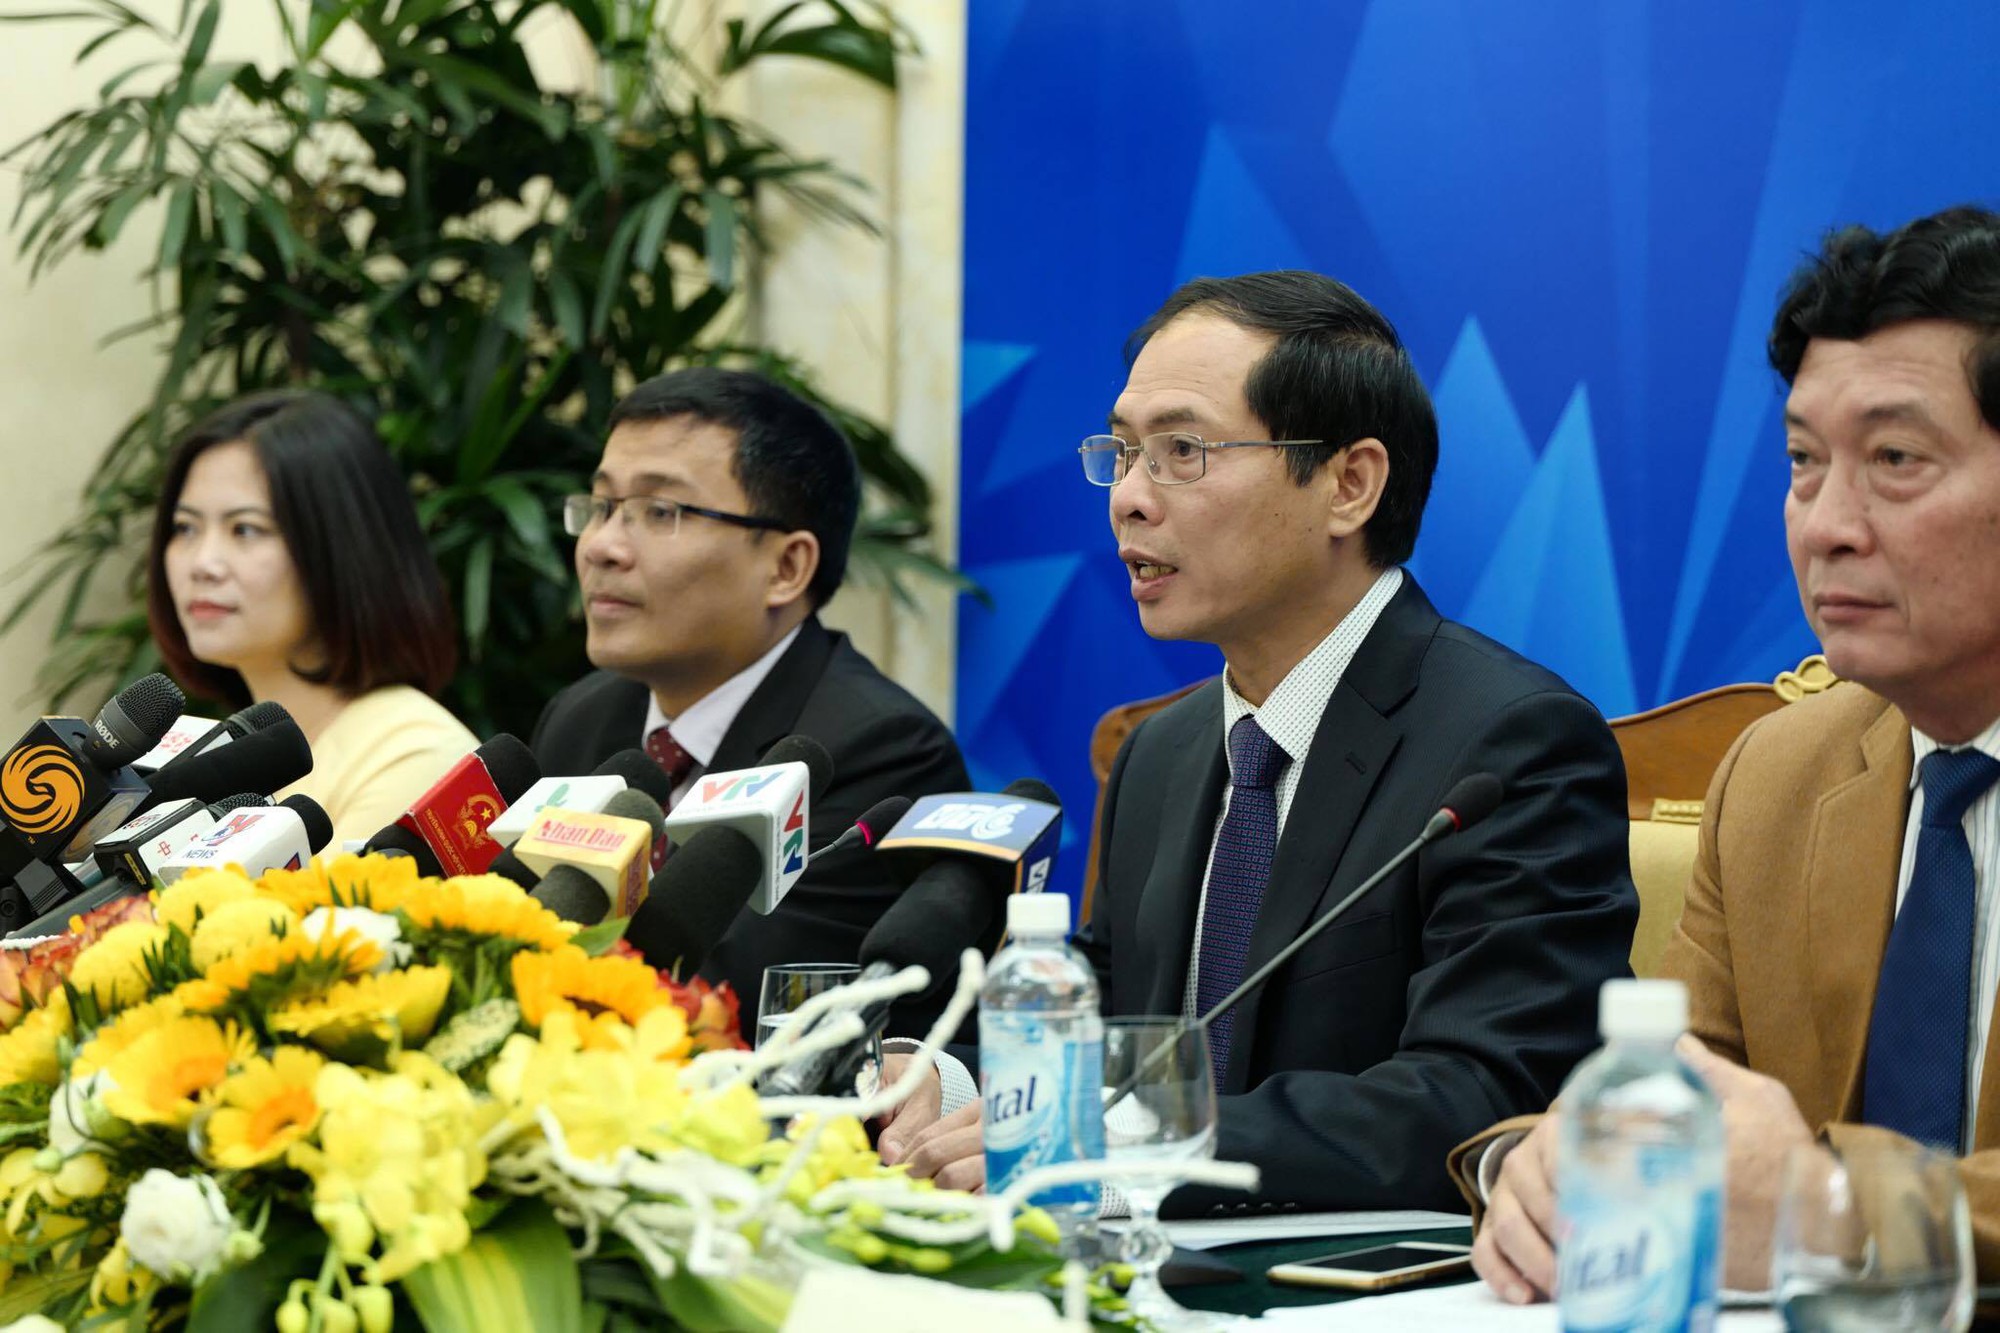 Press conference for APEC summit week convened in Da Nang